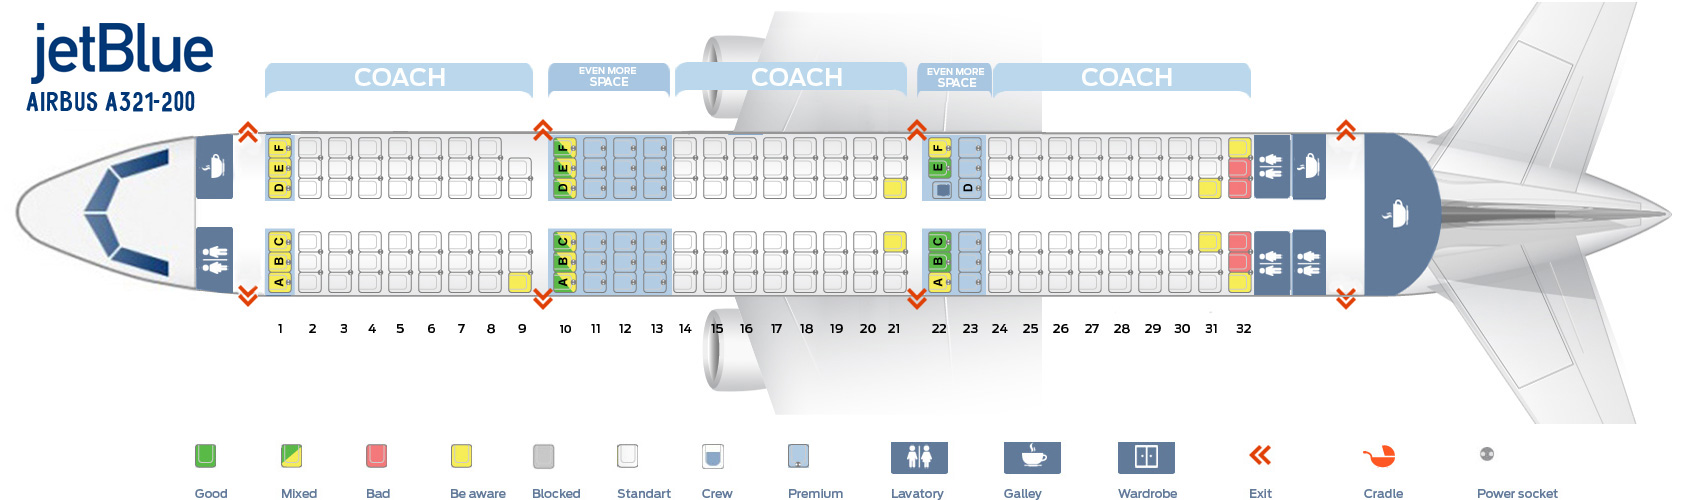 Seat map Airbus A321200 "JetBlue". Best seats in plane